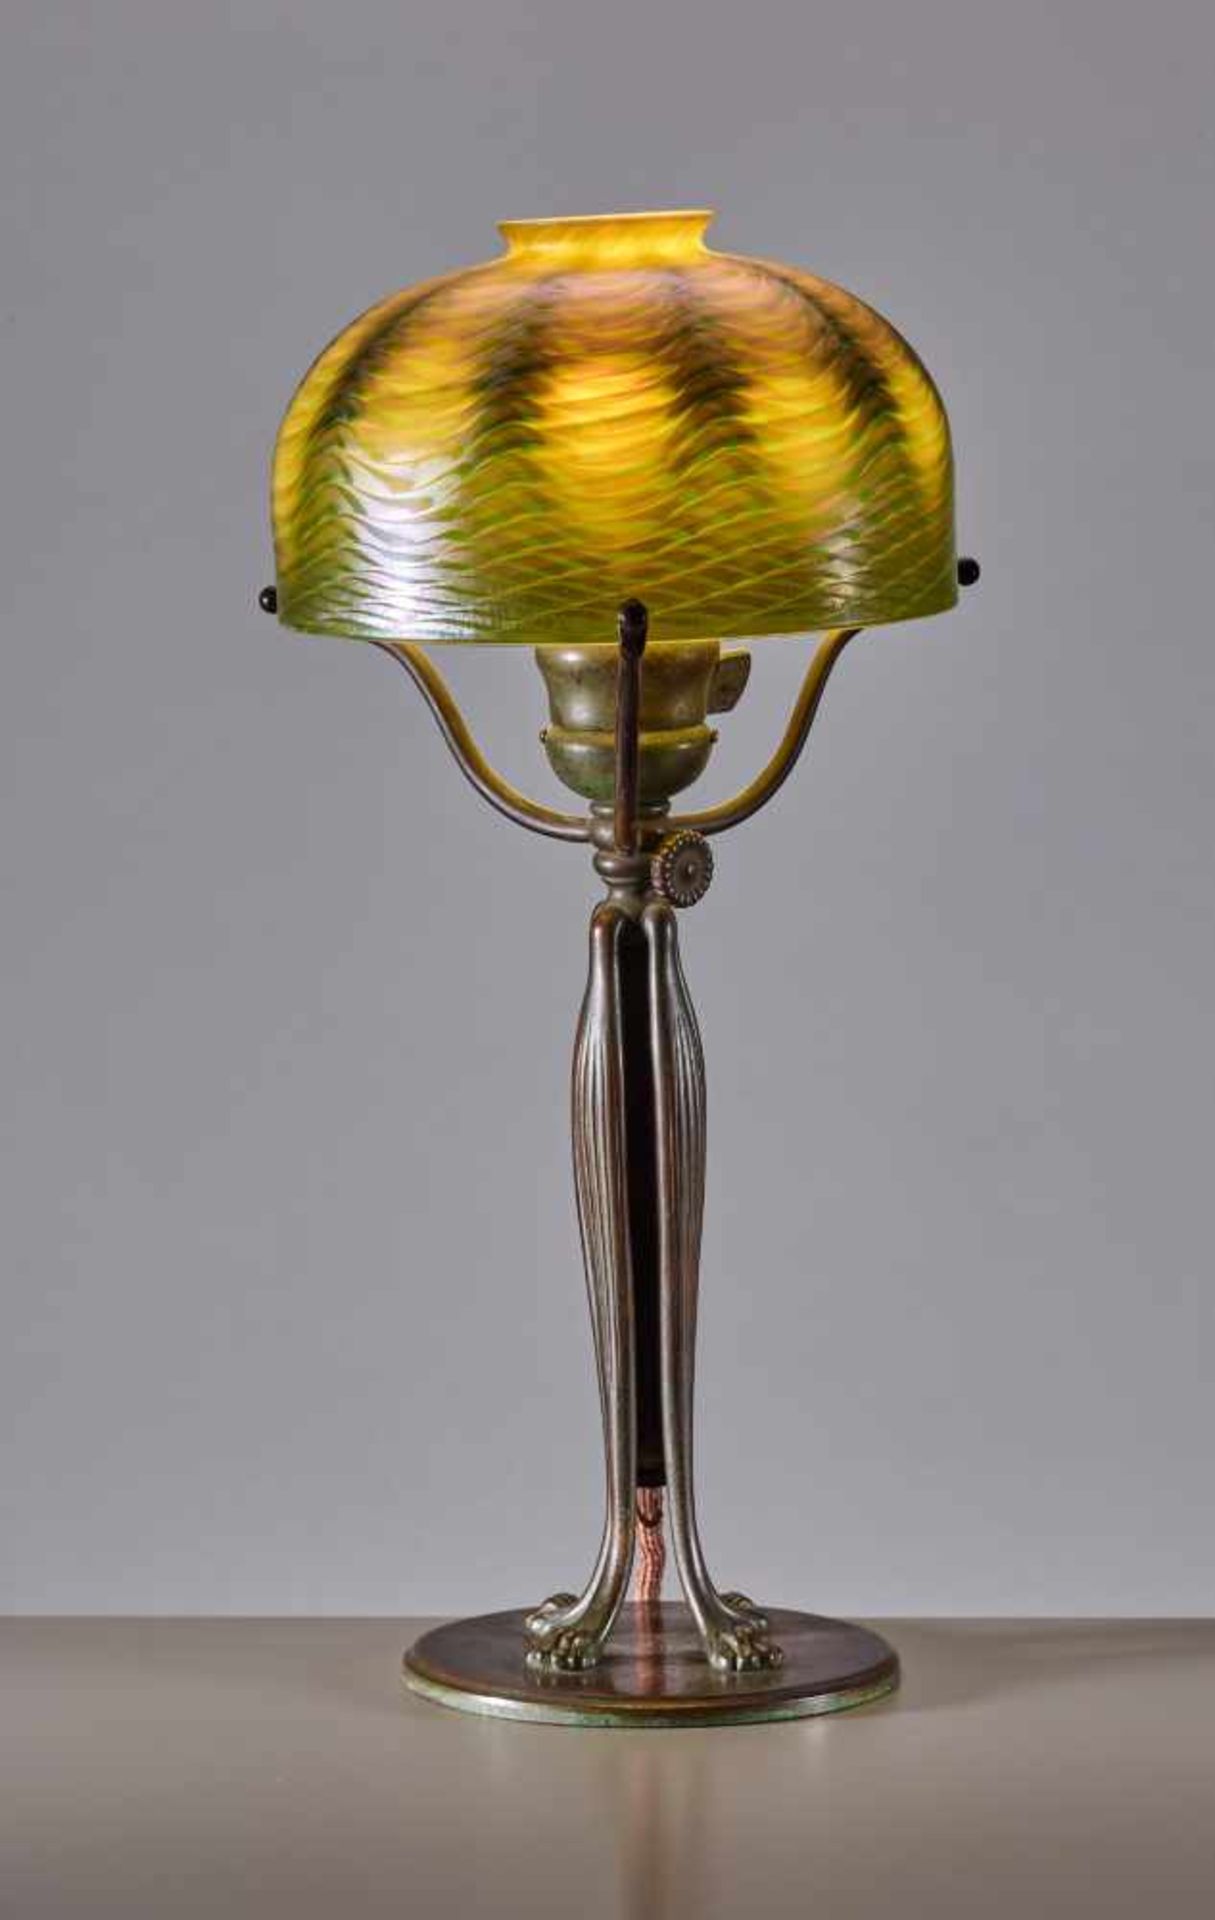 TIFFANY, FAVRILE TABLE LAMP, USA 1905Louis Comfort Tiffany (1848-1933) – American painter and - Image 8 of 10